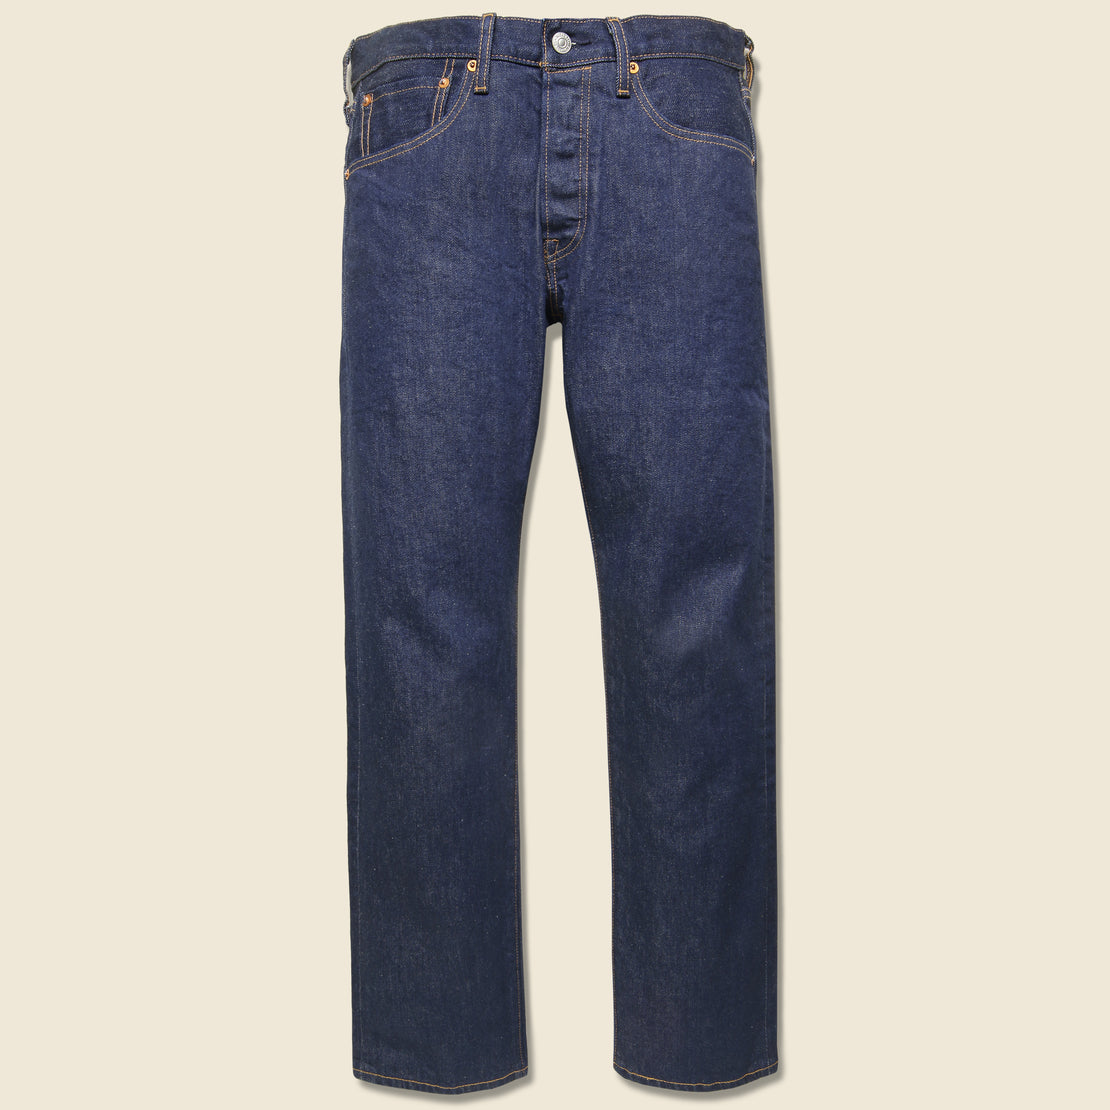 Levis Made & Crafted 501 Original Fit Jean - Rinse Stretch